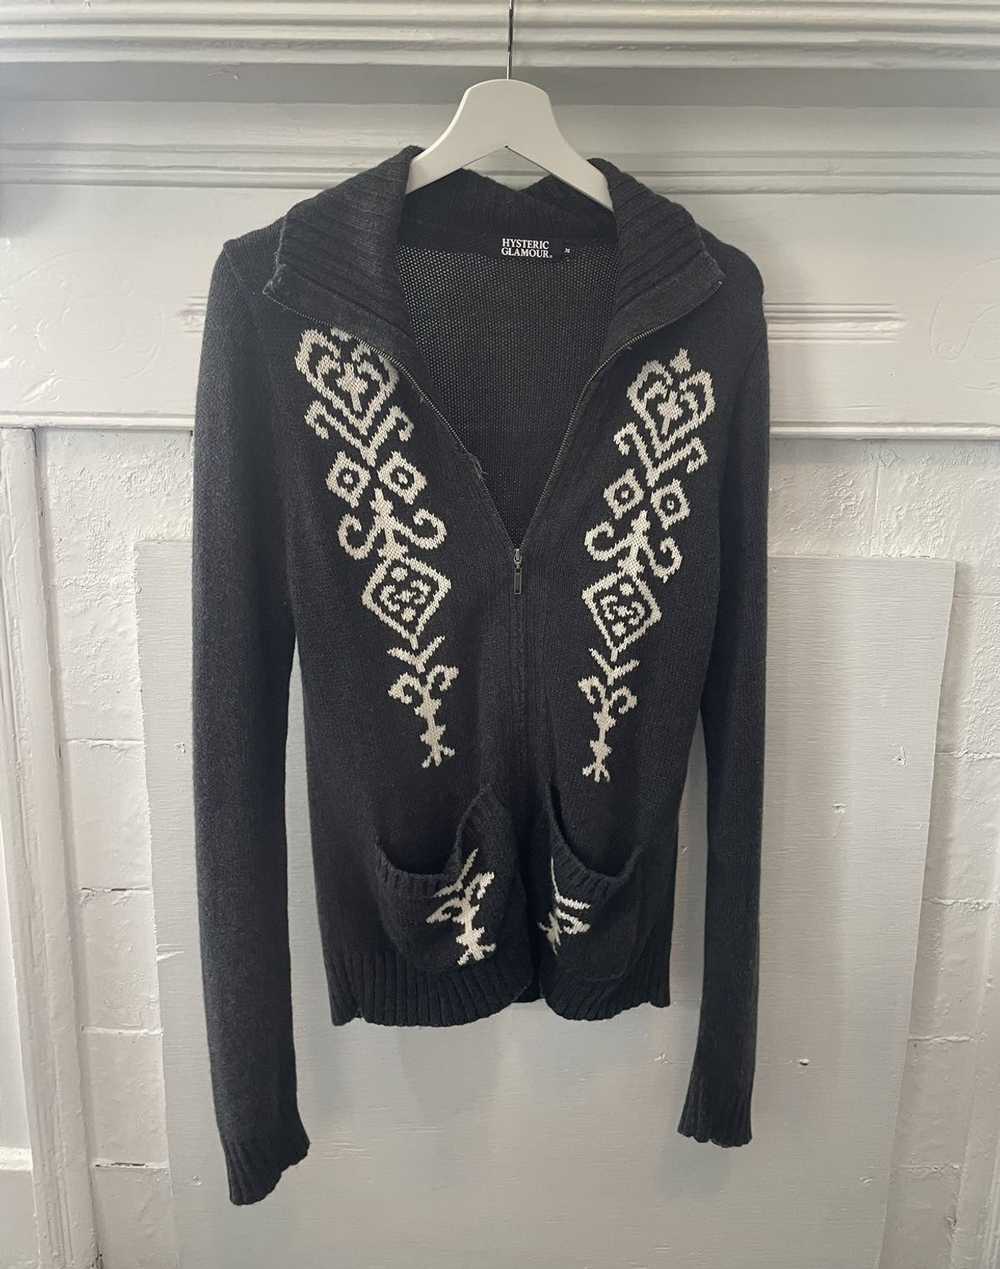 Hysteric Glamour Hysteric Glamour Zip Up Cardigan - image 1